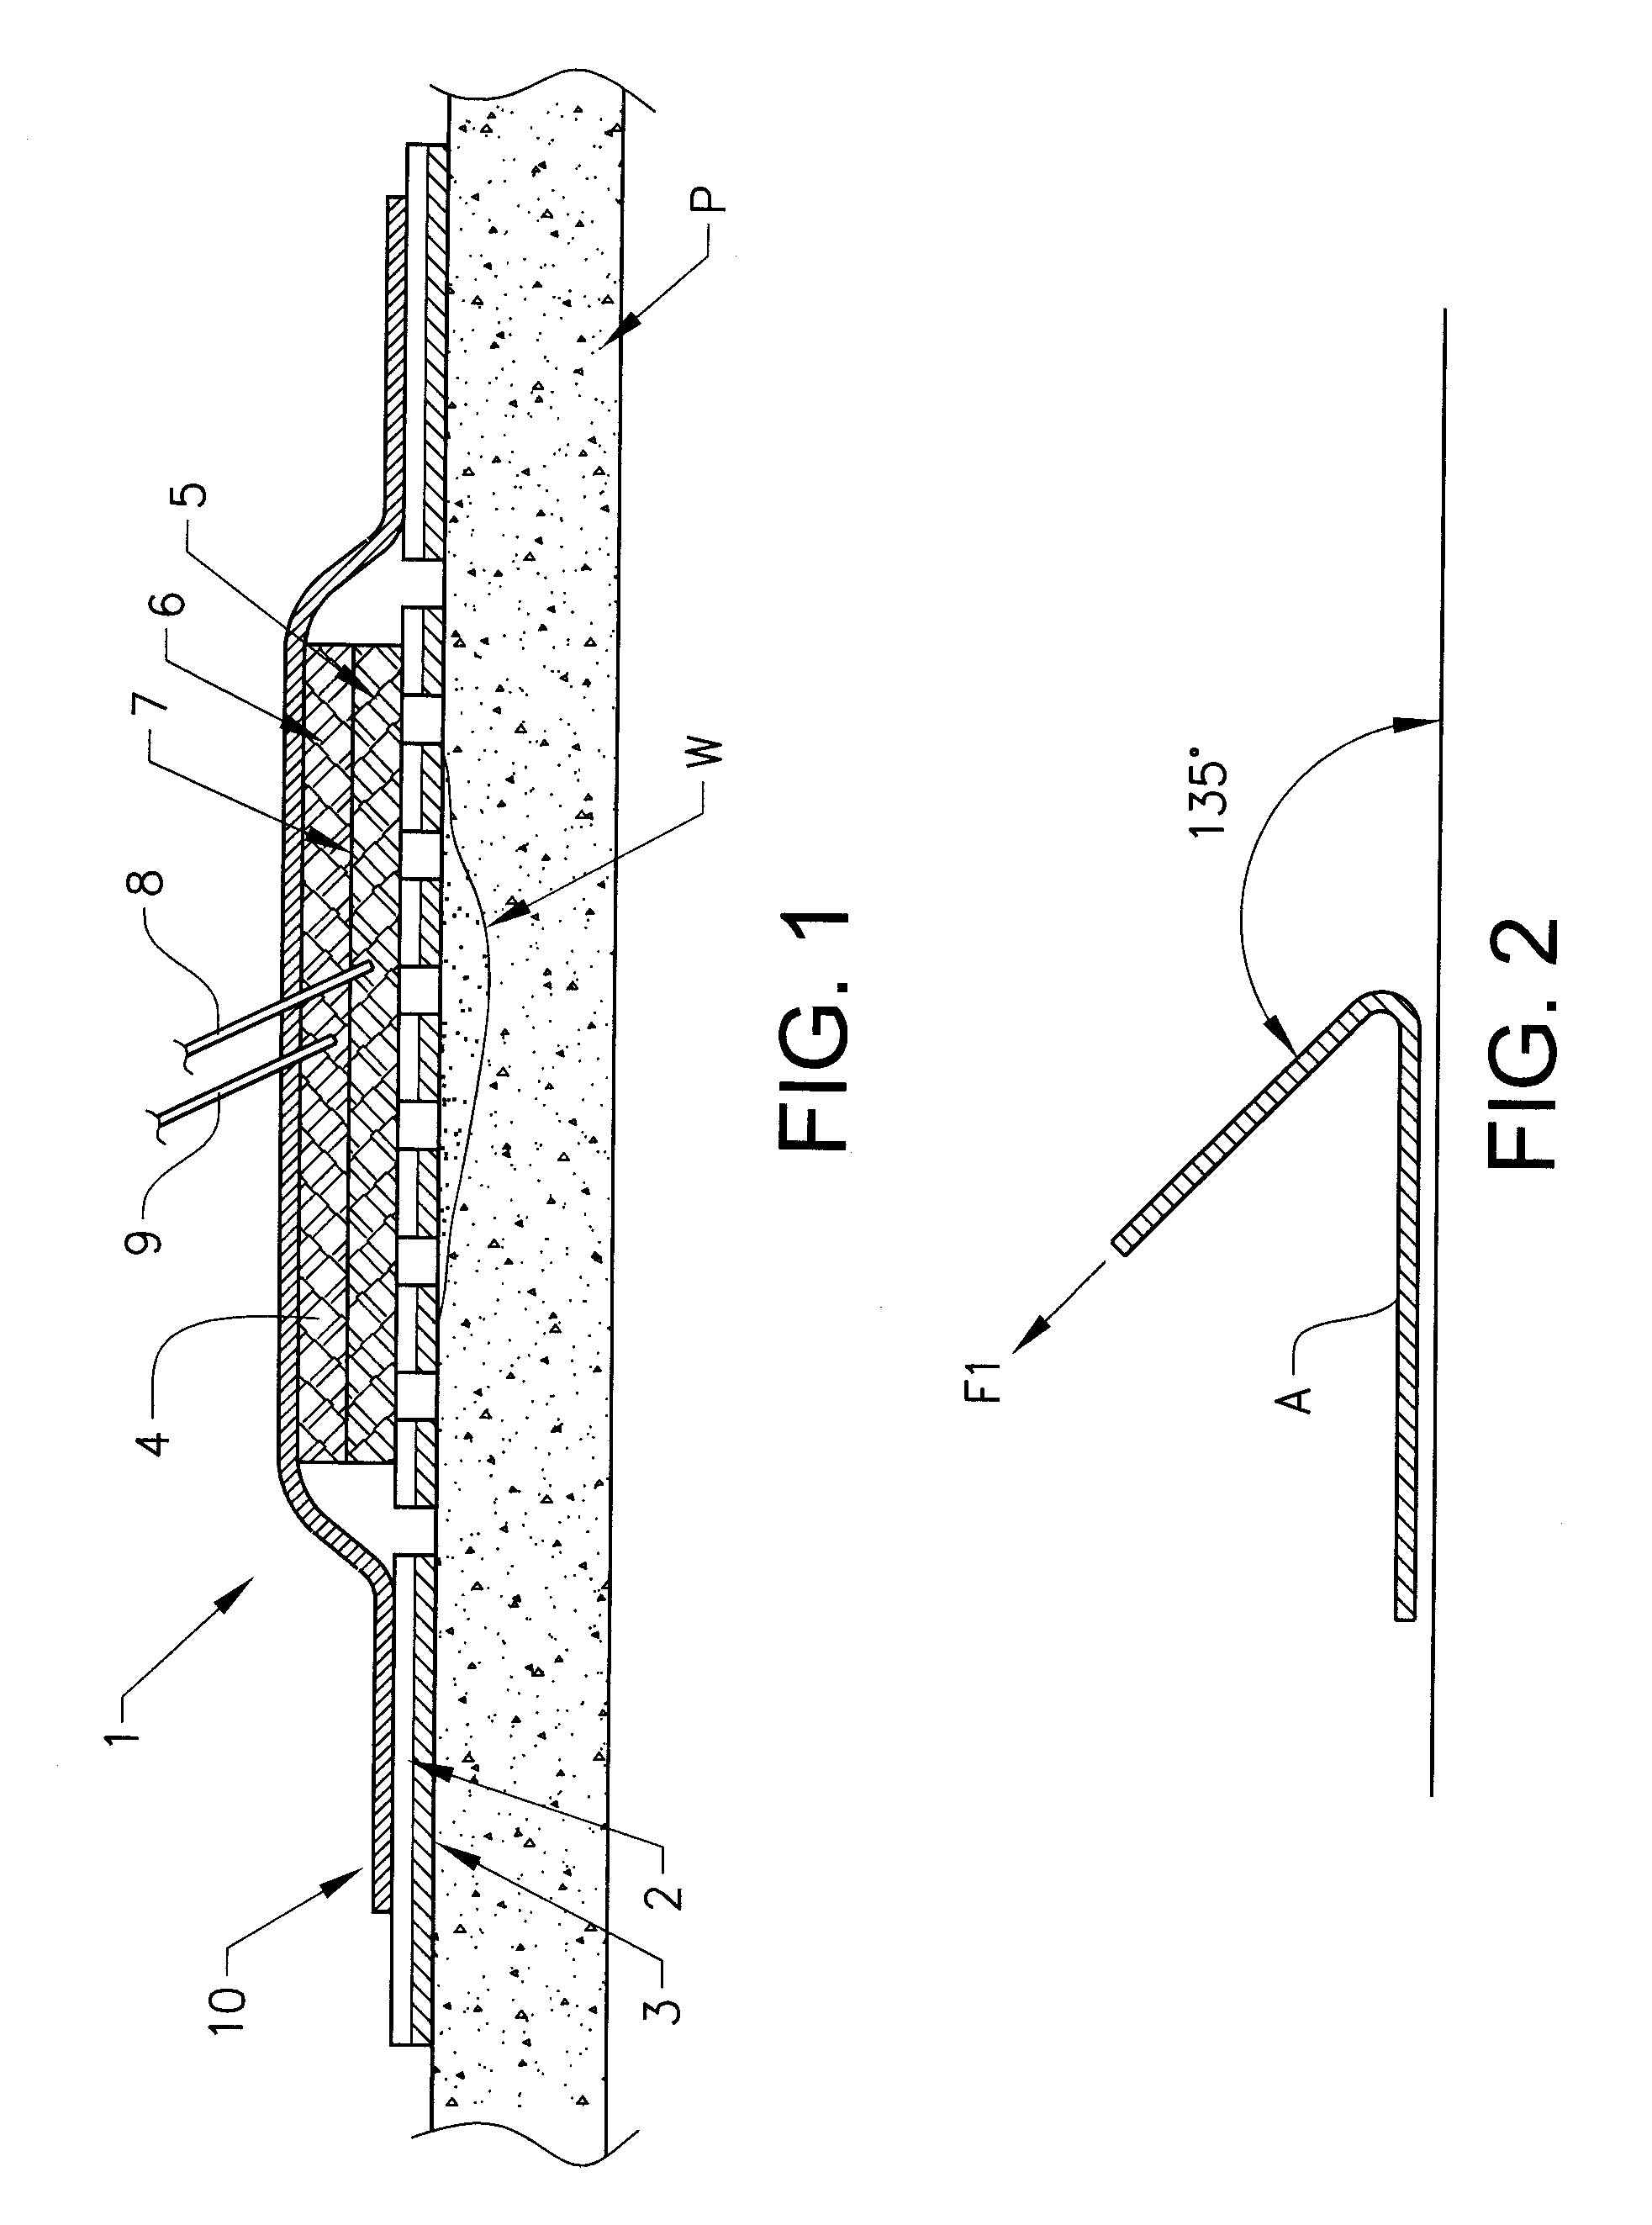 Irrigation dressing and method of applying such an irrigating dressing